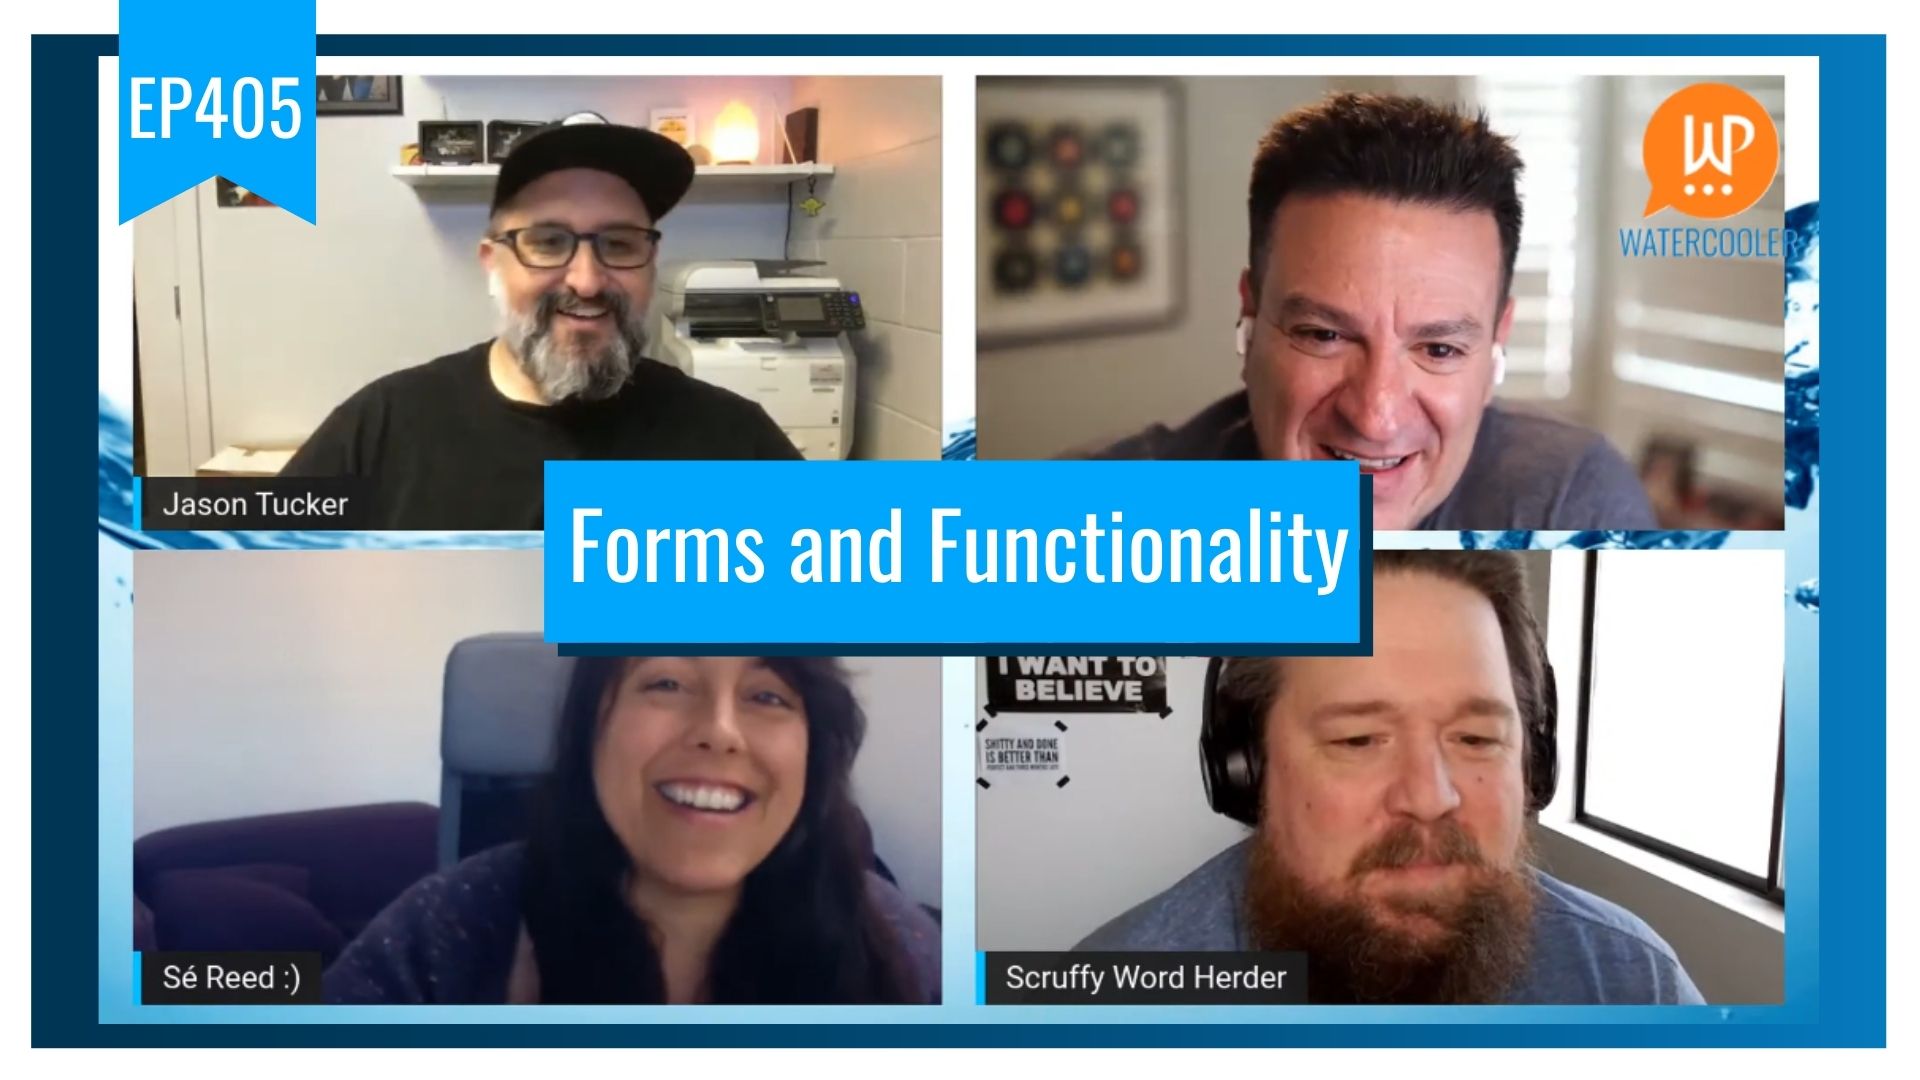 EP405 – Forms and Functionality